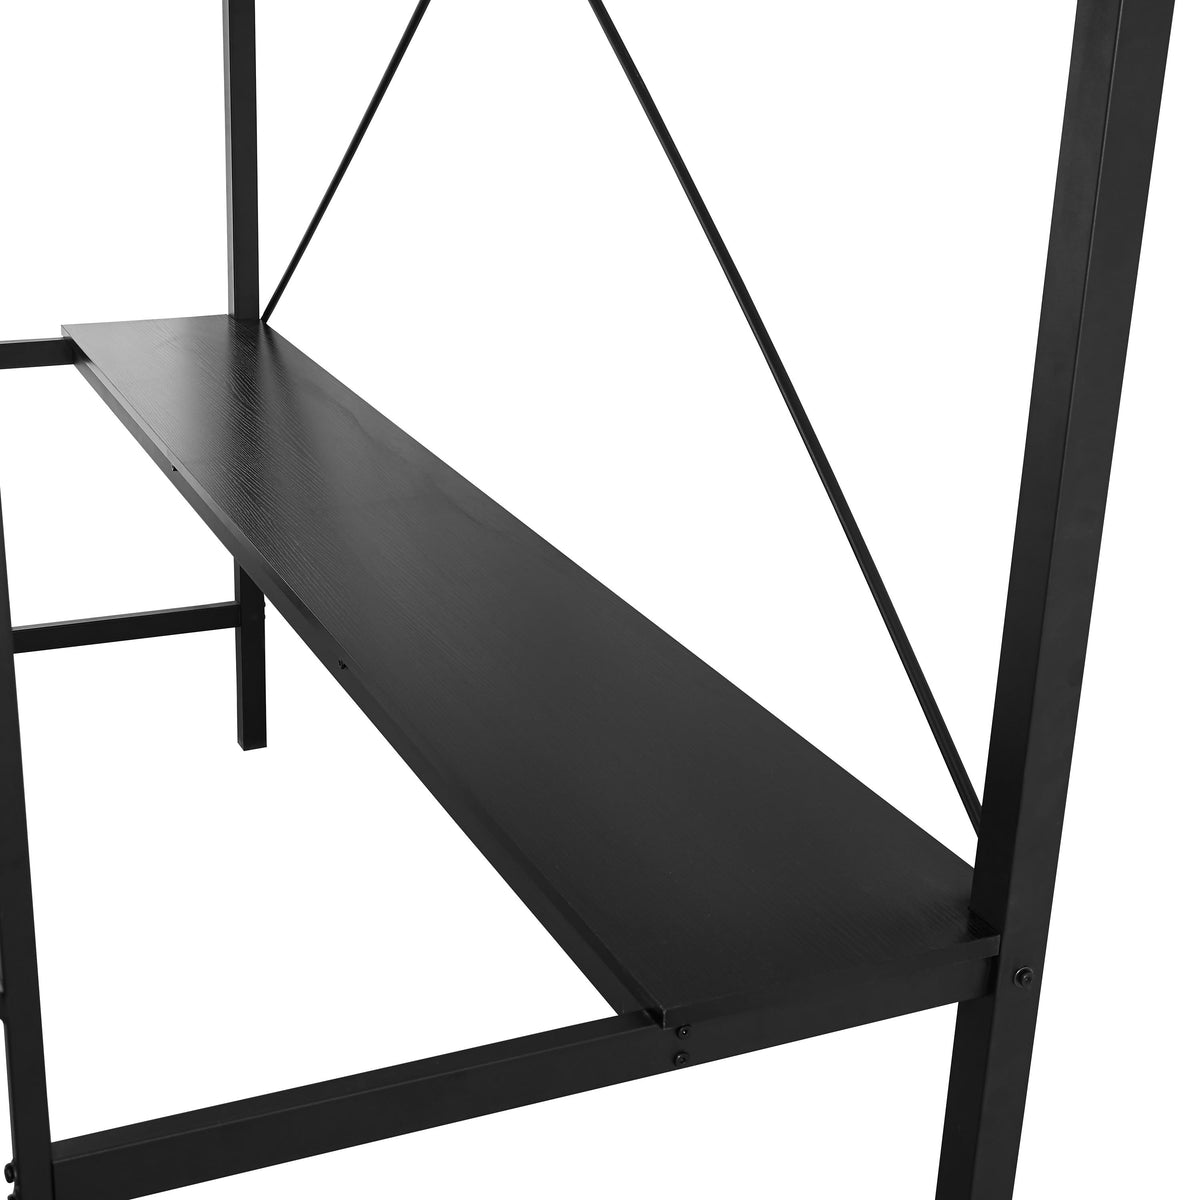 Black |#| Sturdy Metal Loft Bed Frame in Black with Desk and Safety Rails - Twin